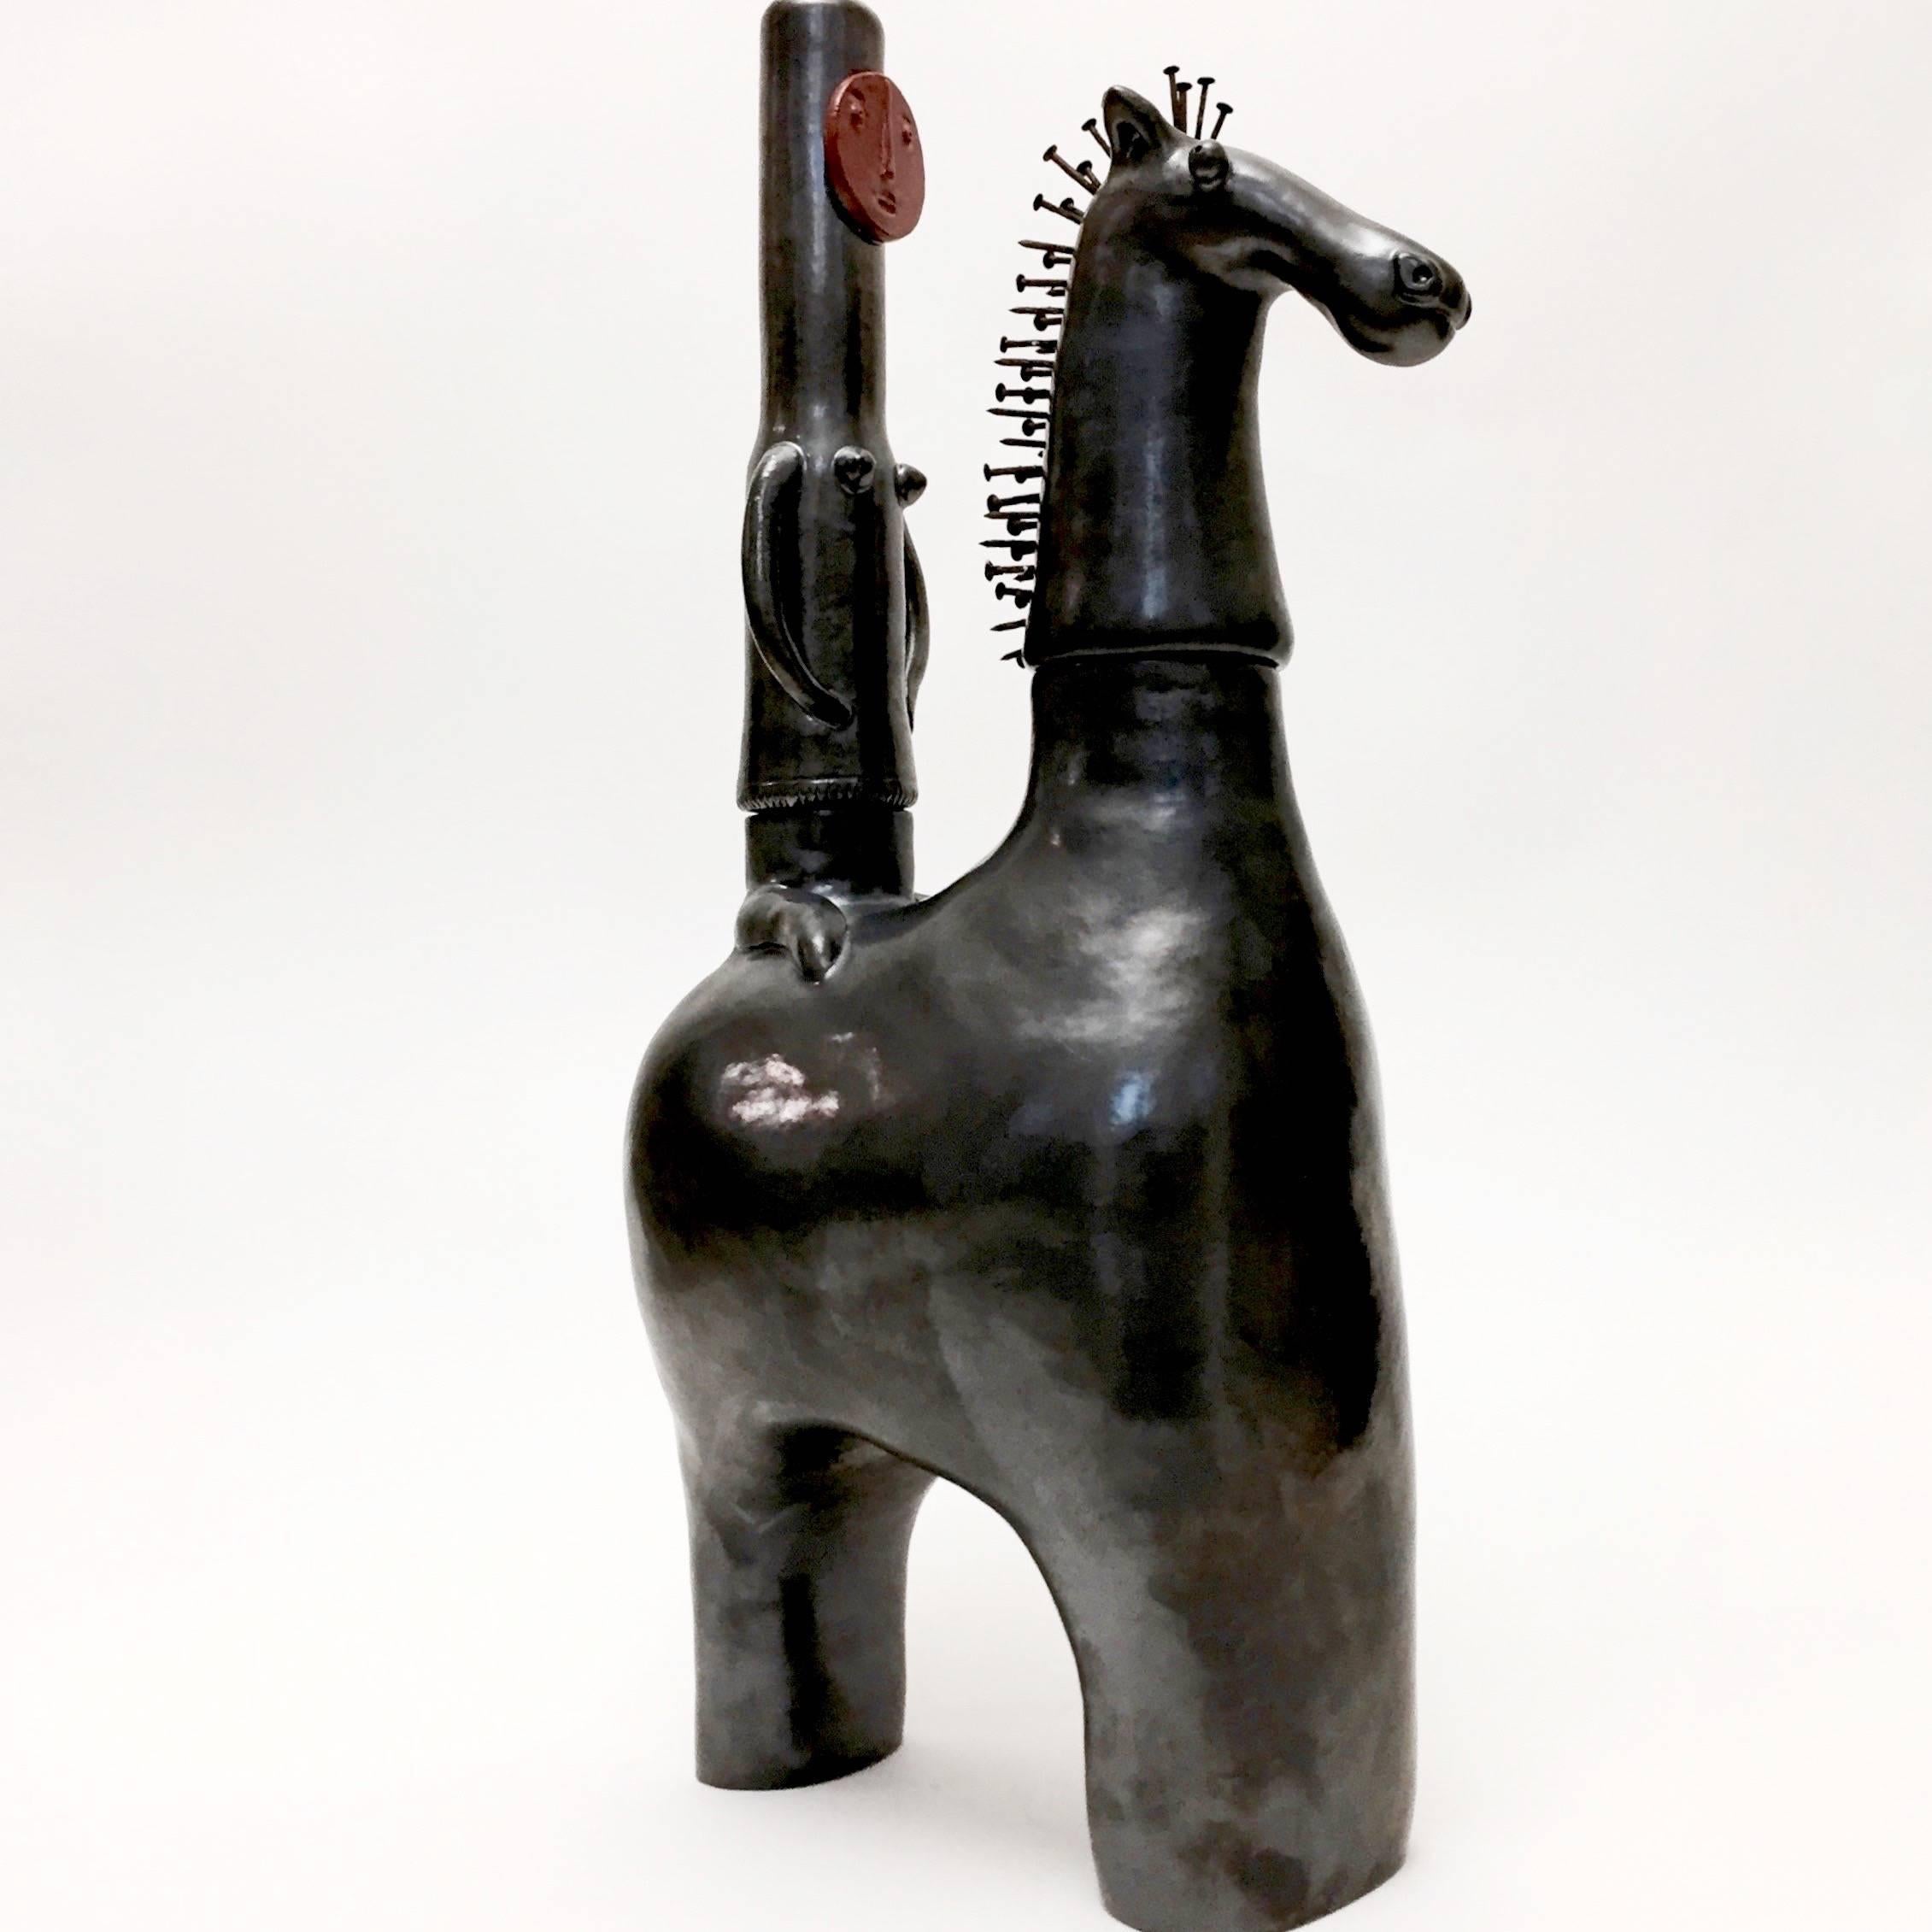 Important sculpture forming a stylized equestrian group, earthenware glazed in glossy black and dark red, the horse mane is decorated with metal nails.
One of a kind hand-sculpted piece, designed by the French ceramicists, Dalo. 

The removable